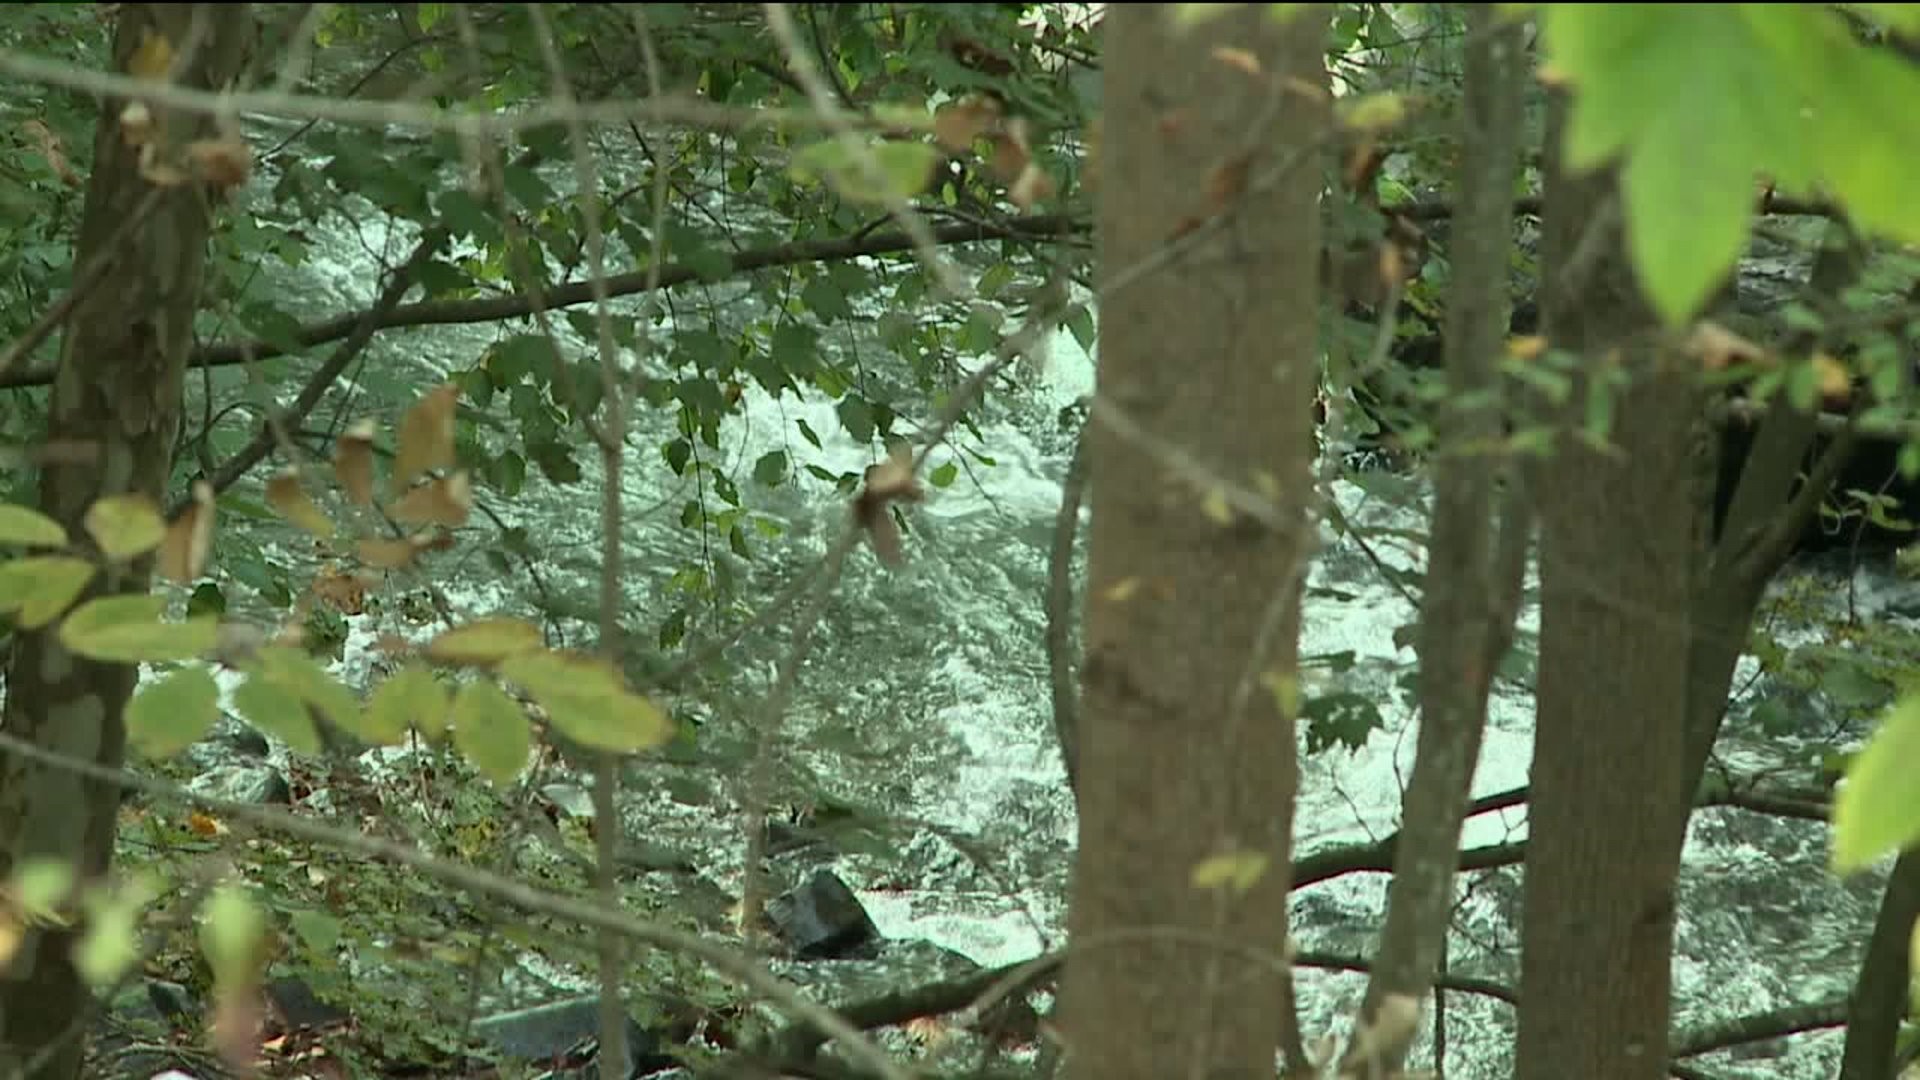 Man Missing After Jumping into Swimming Hole in Luzerne County